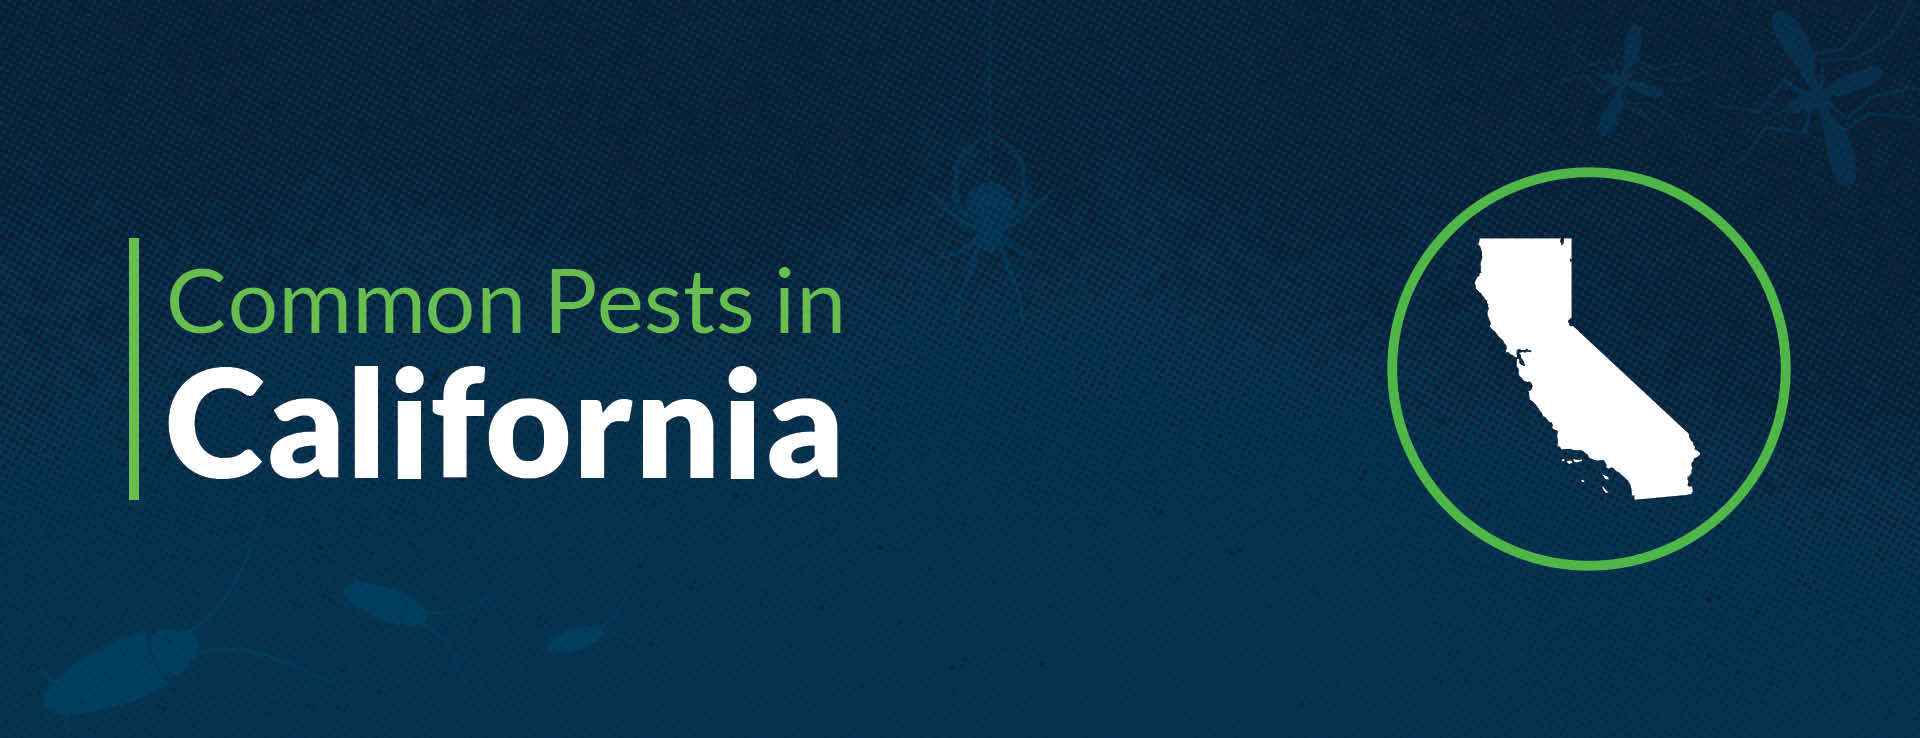 PPMA Common Pests By State California